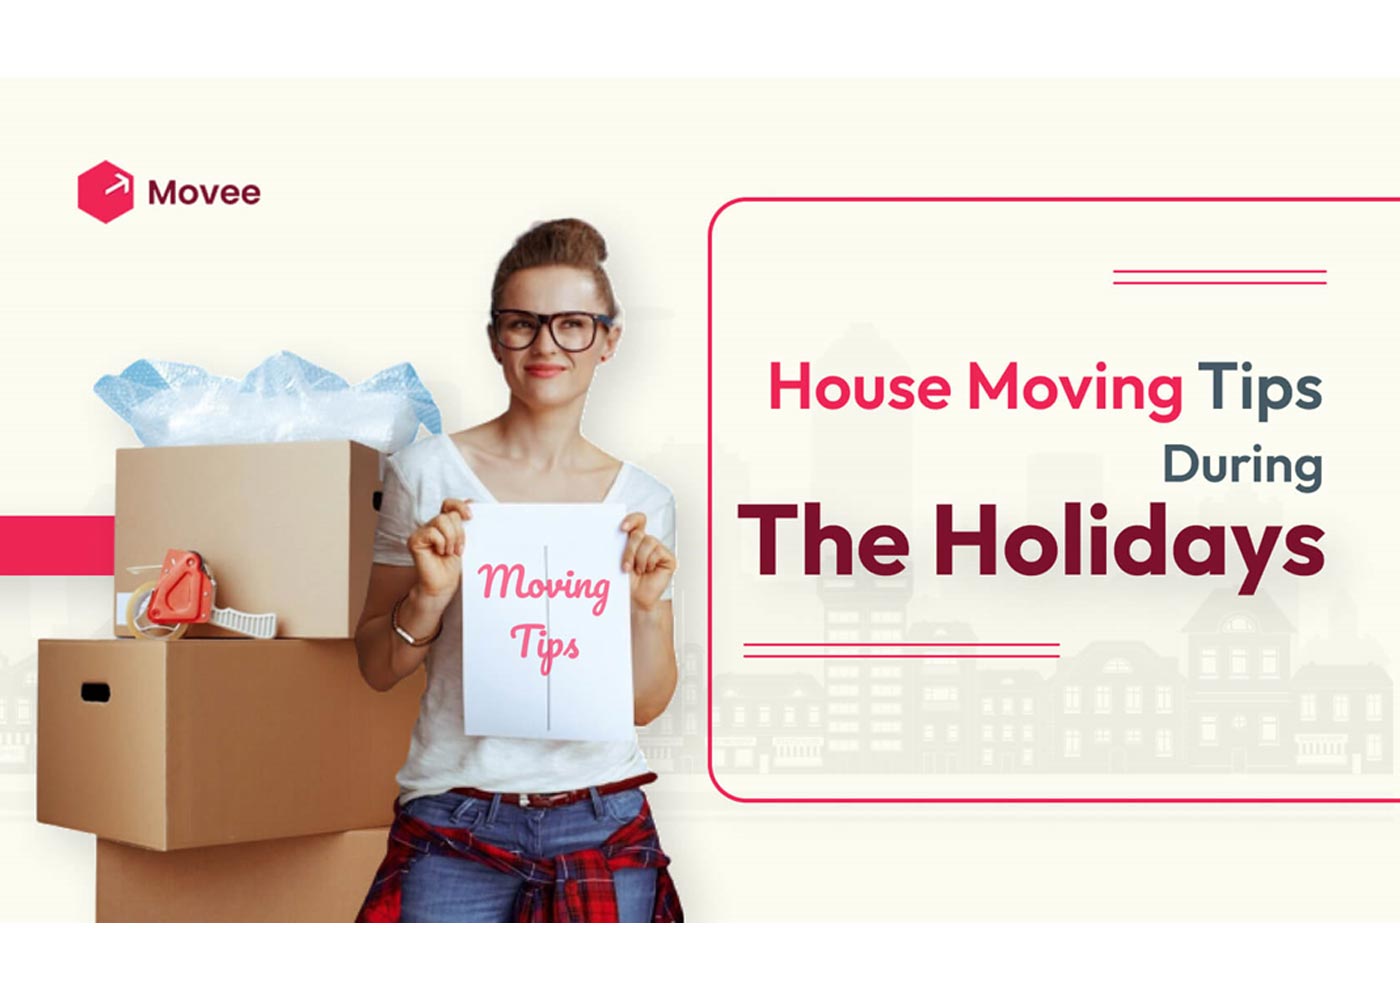 House Moving Tips During The Holidays